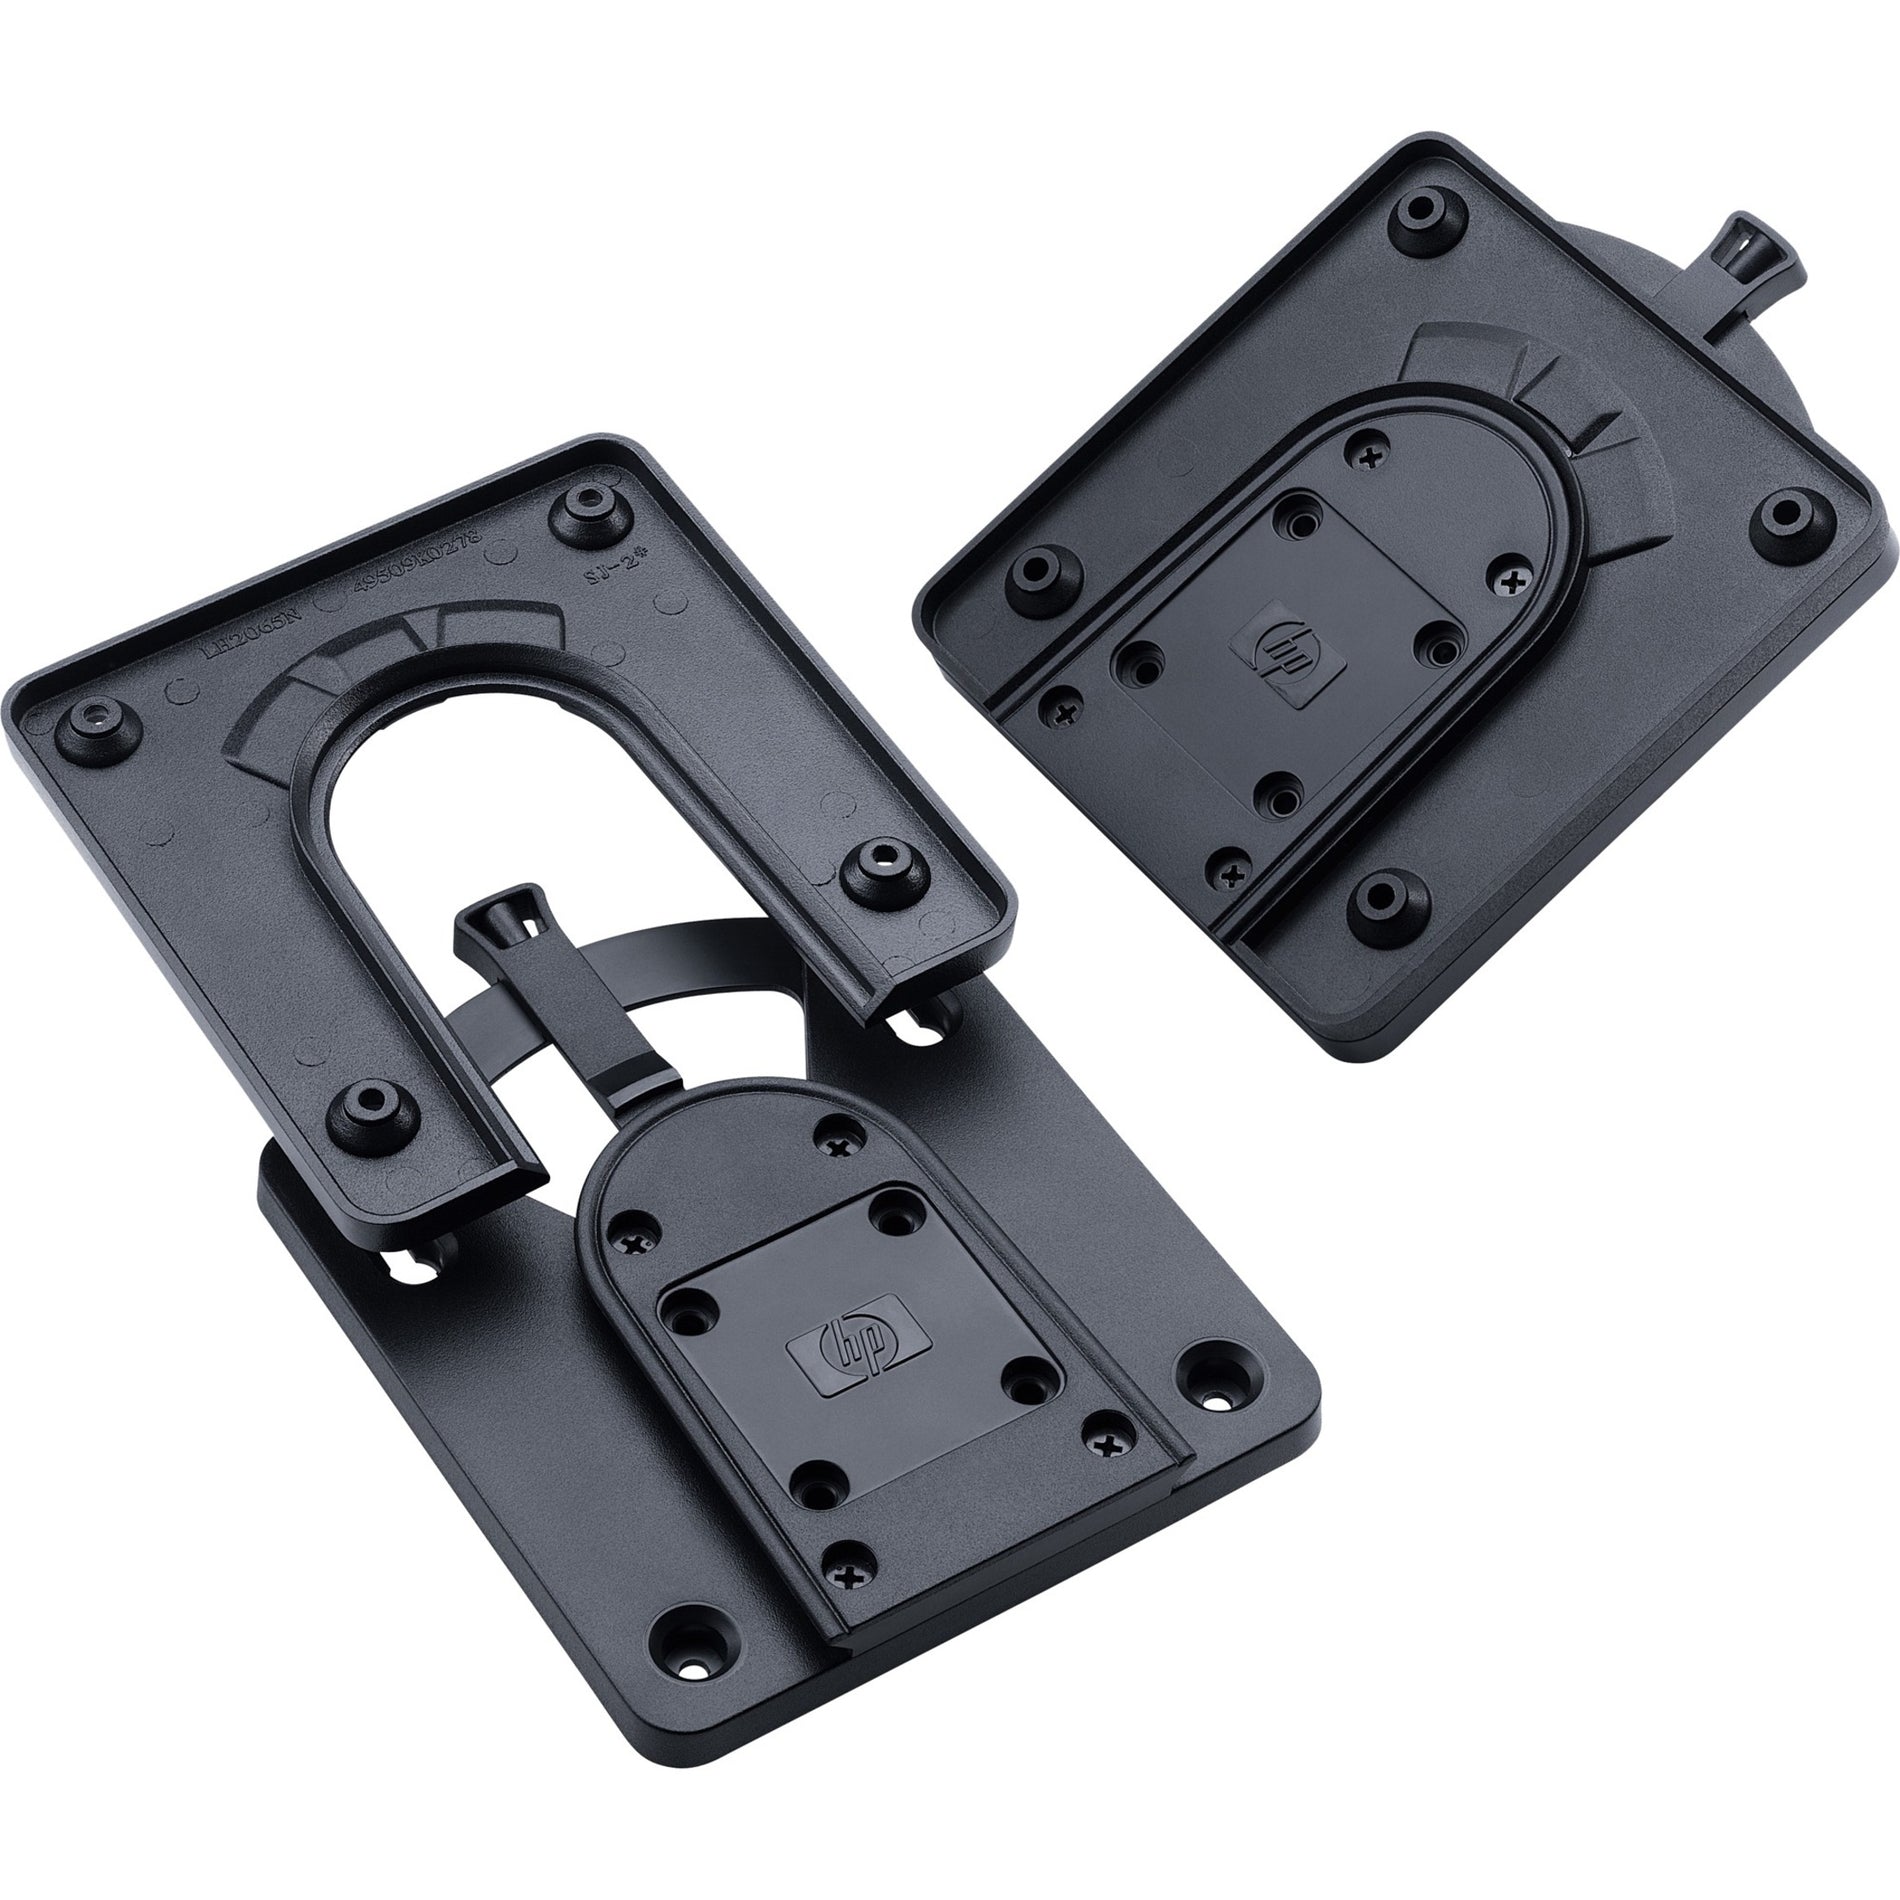 HP 6KD15AA Quick Release Bracket 2, Wall Mount Your Monitor with Ease